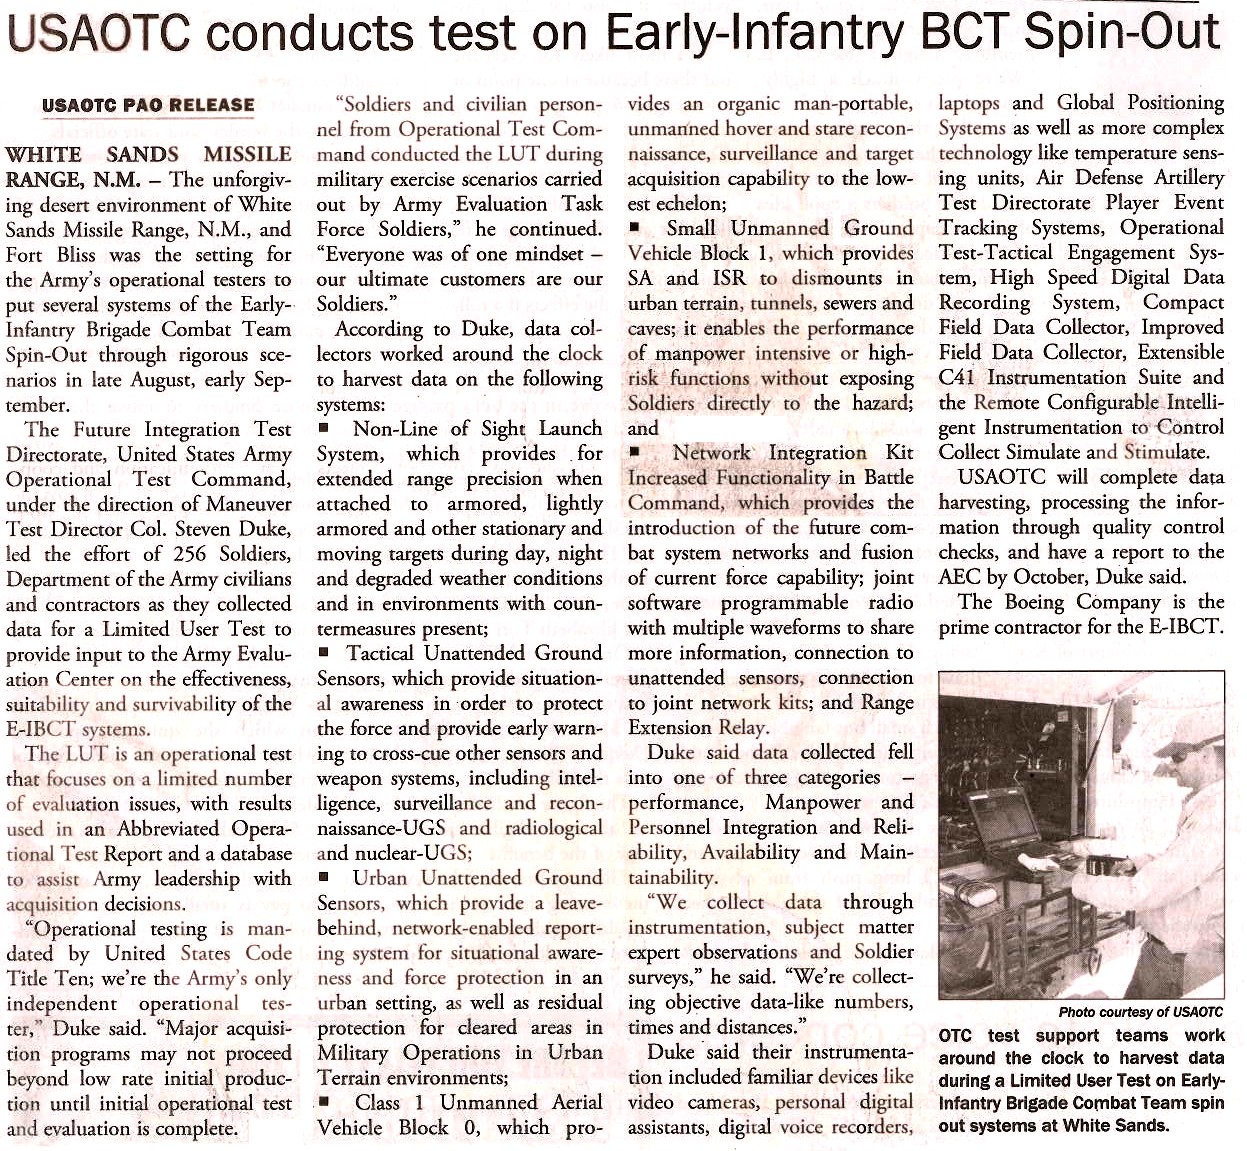 Early-Infantry BCT Spin-Out article